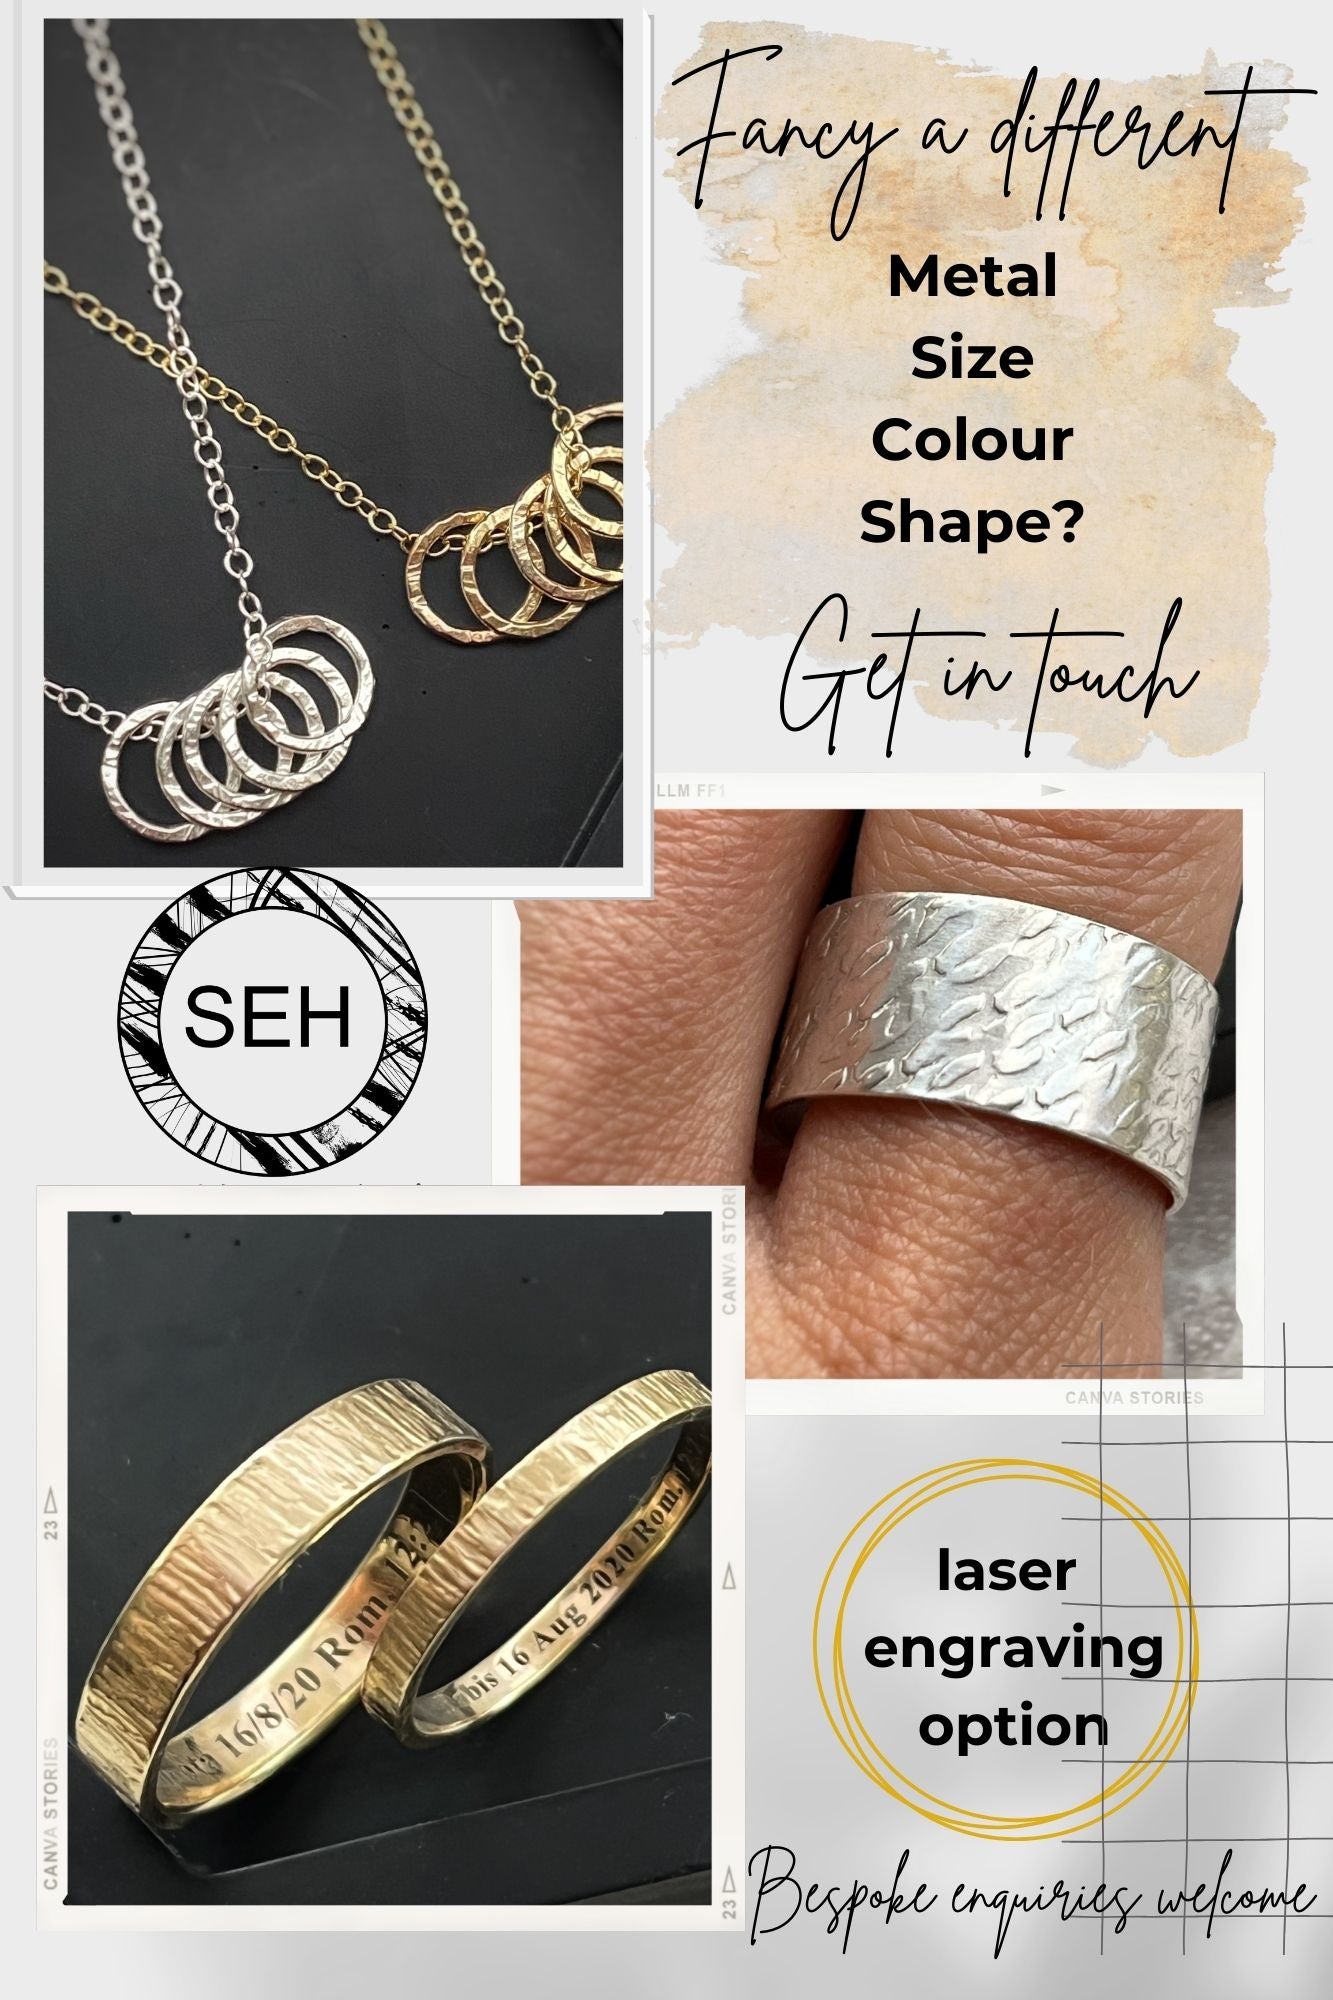 Solid gold 18ct hammered set of rings, 2 handmade delicate 2mm yellow & white gold pair of bands, modern simple stylish tree bark textured flat rings